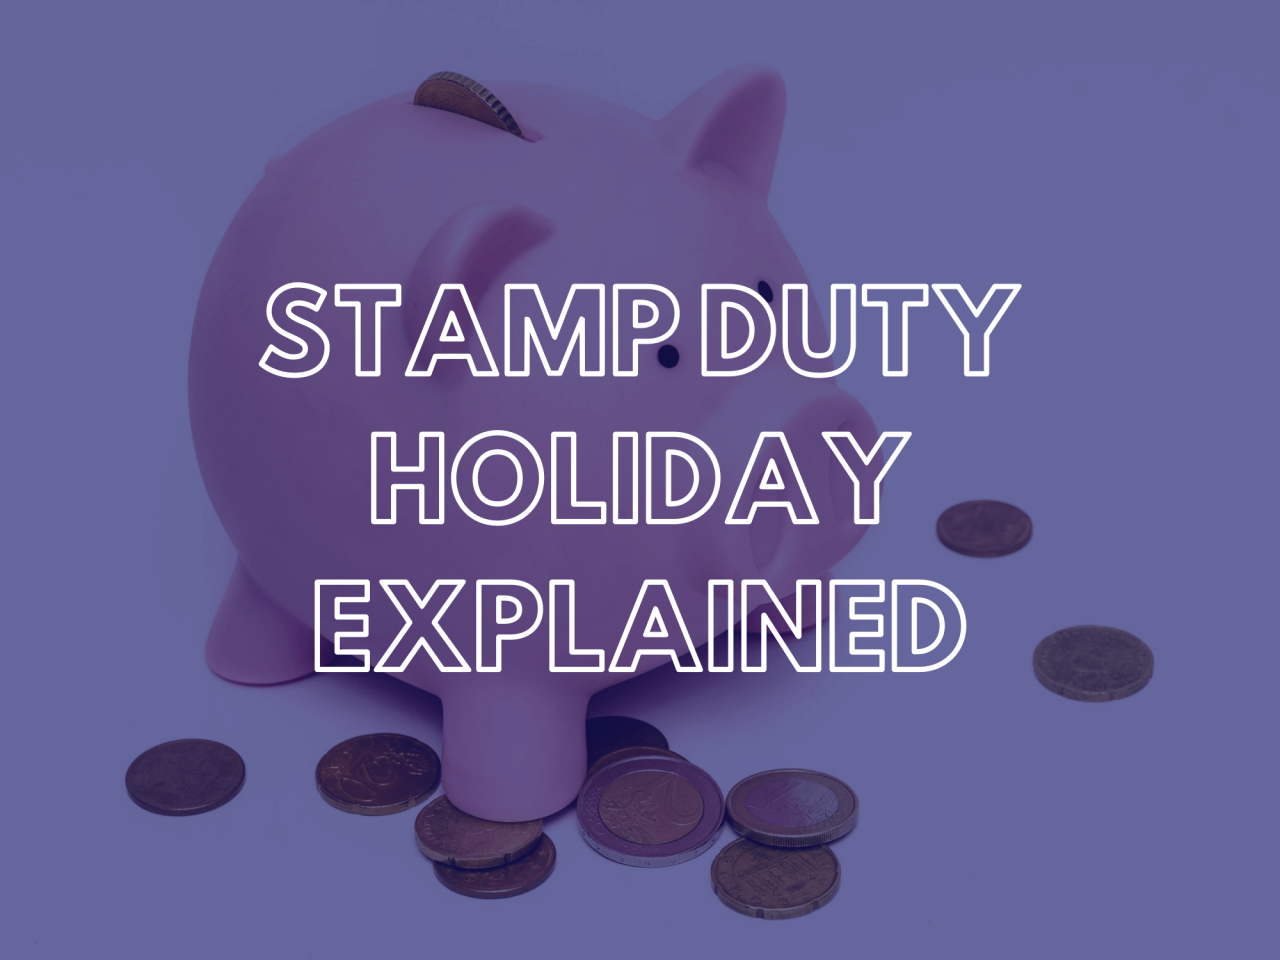 >Guide to Stamp Duty Holiday